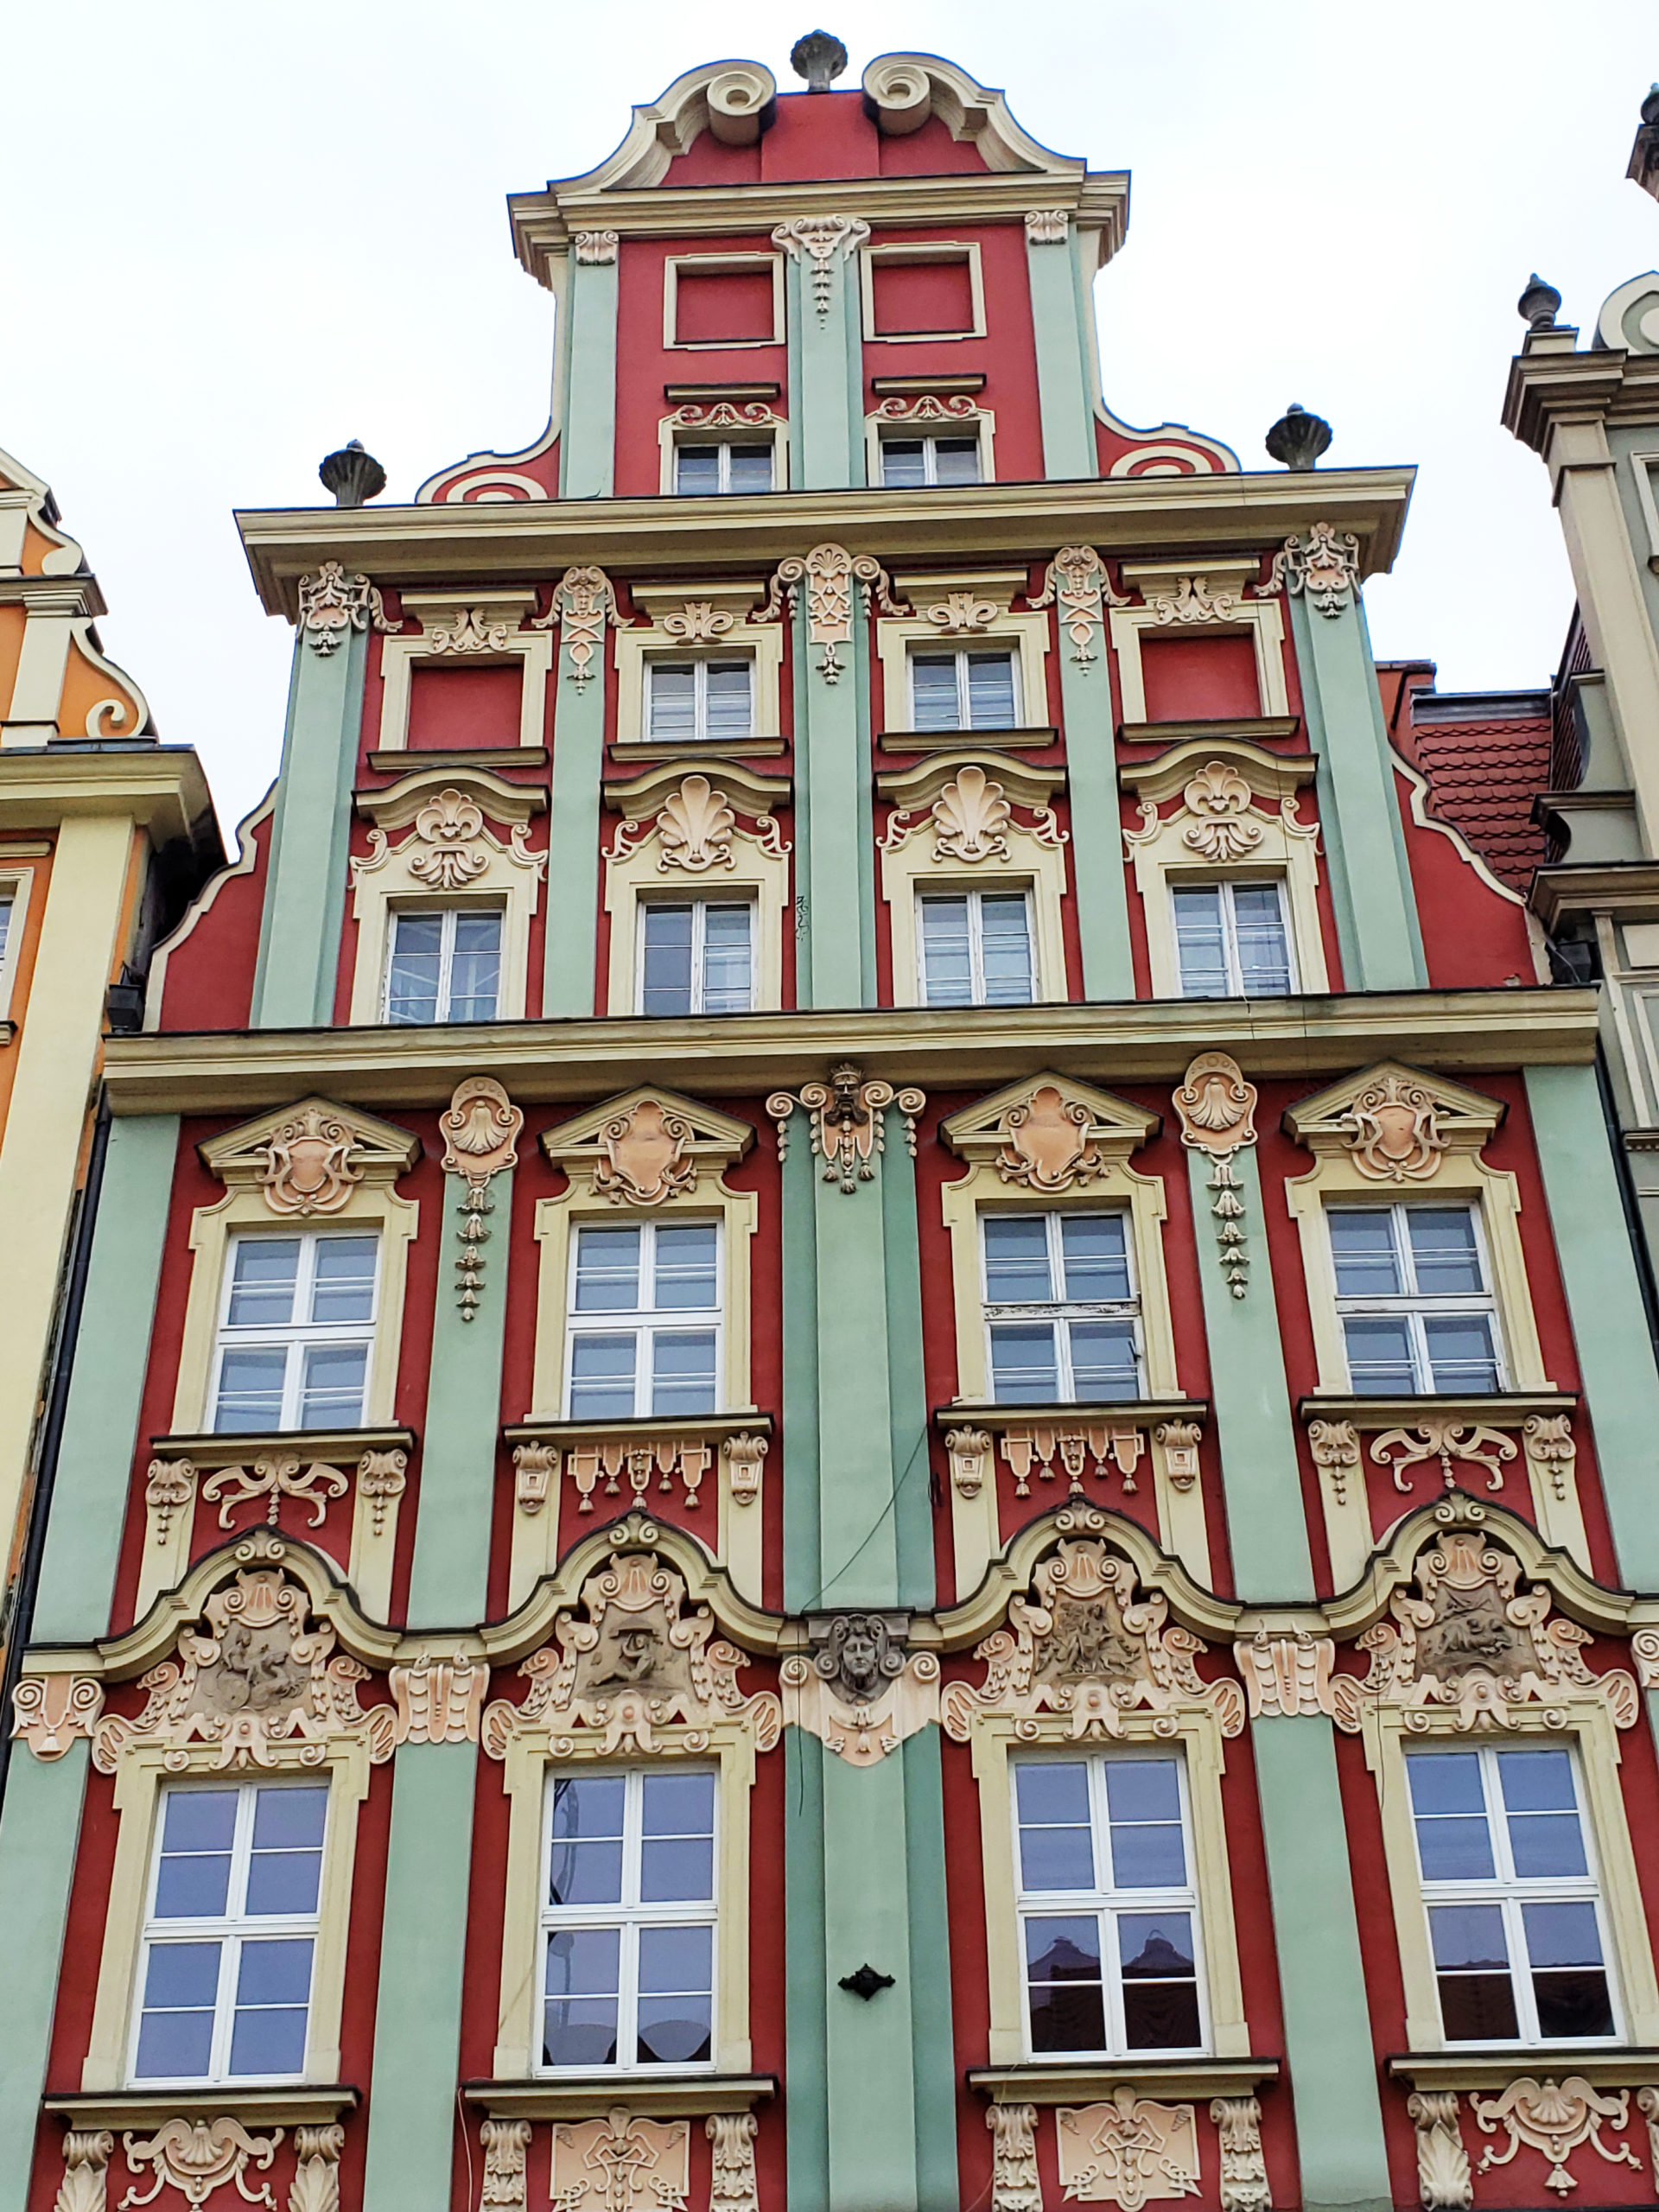 How To Spend The Perfect Day In Wrocław, Poland